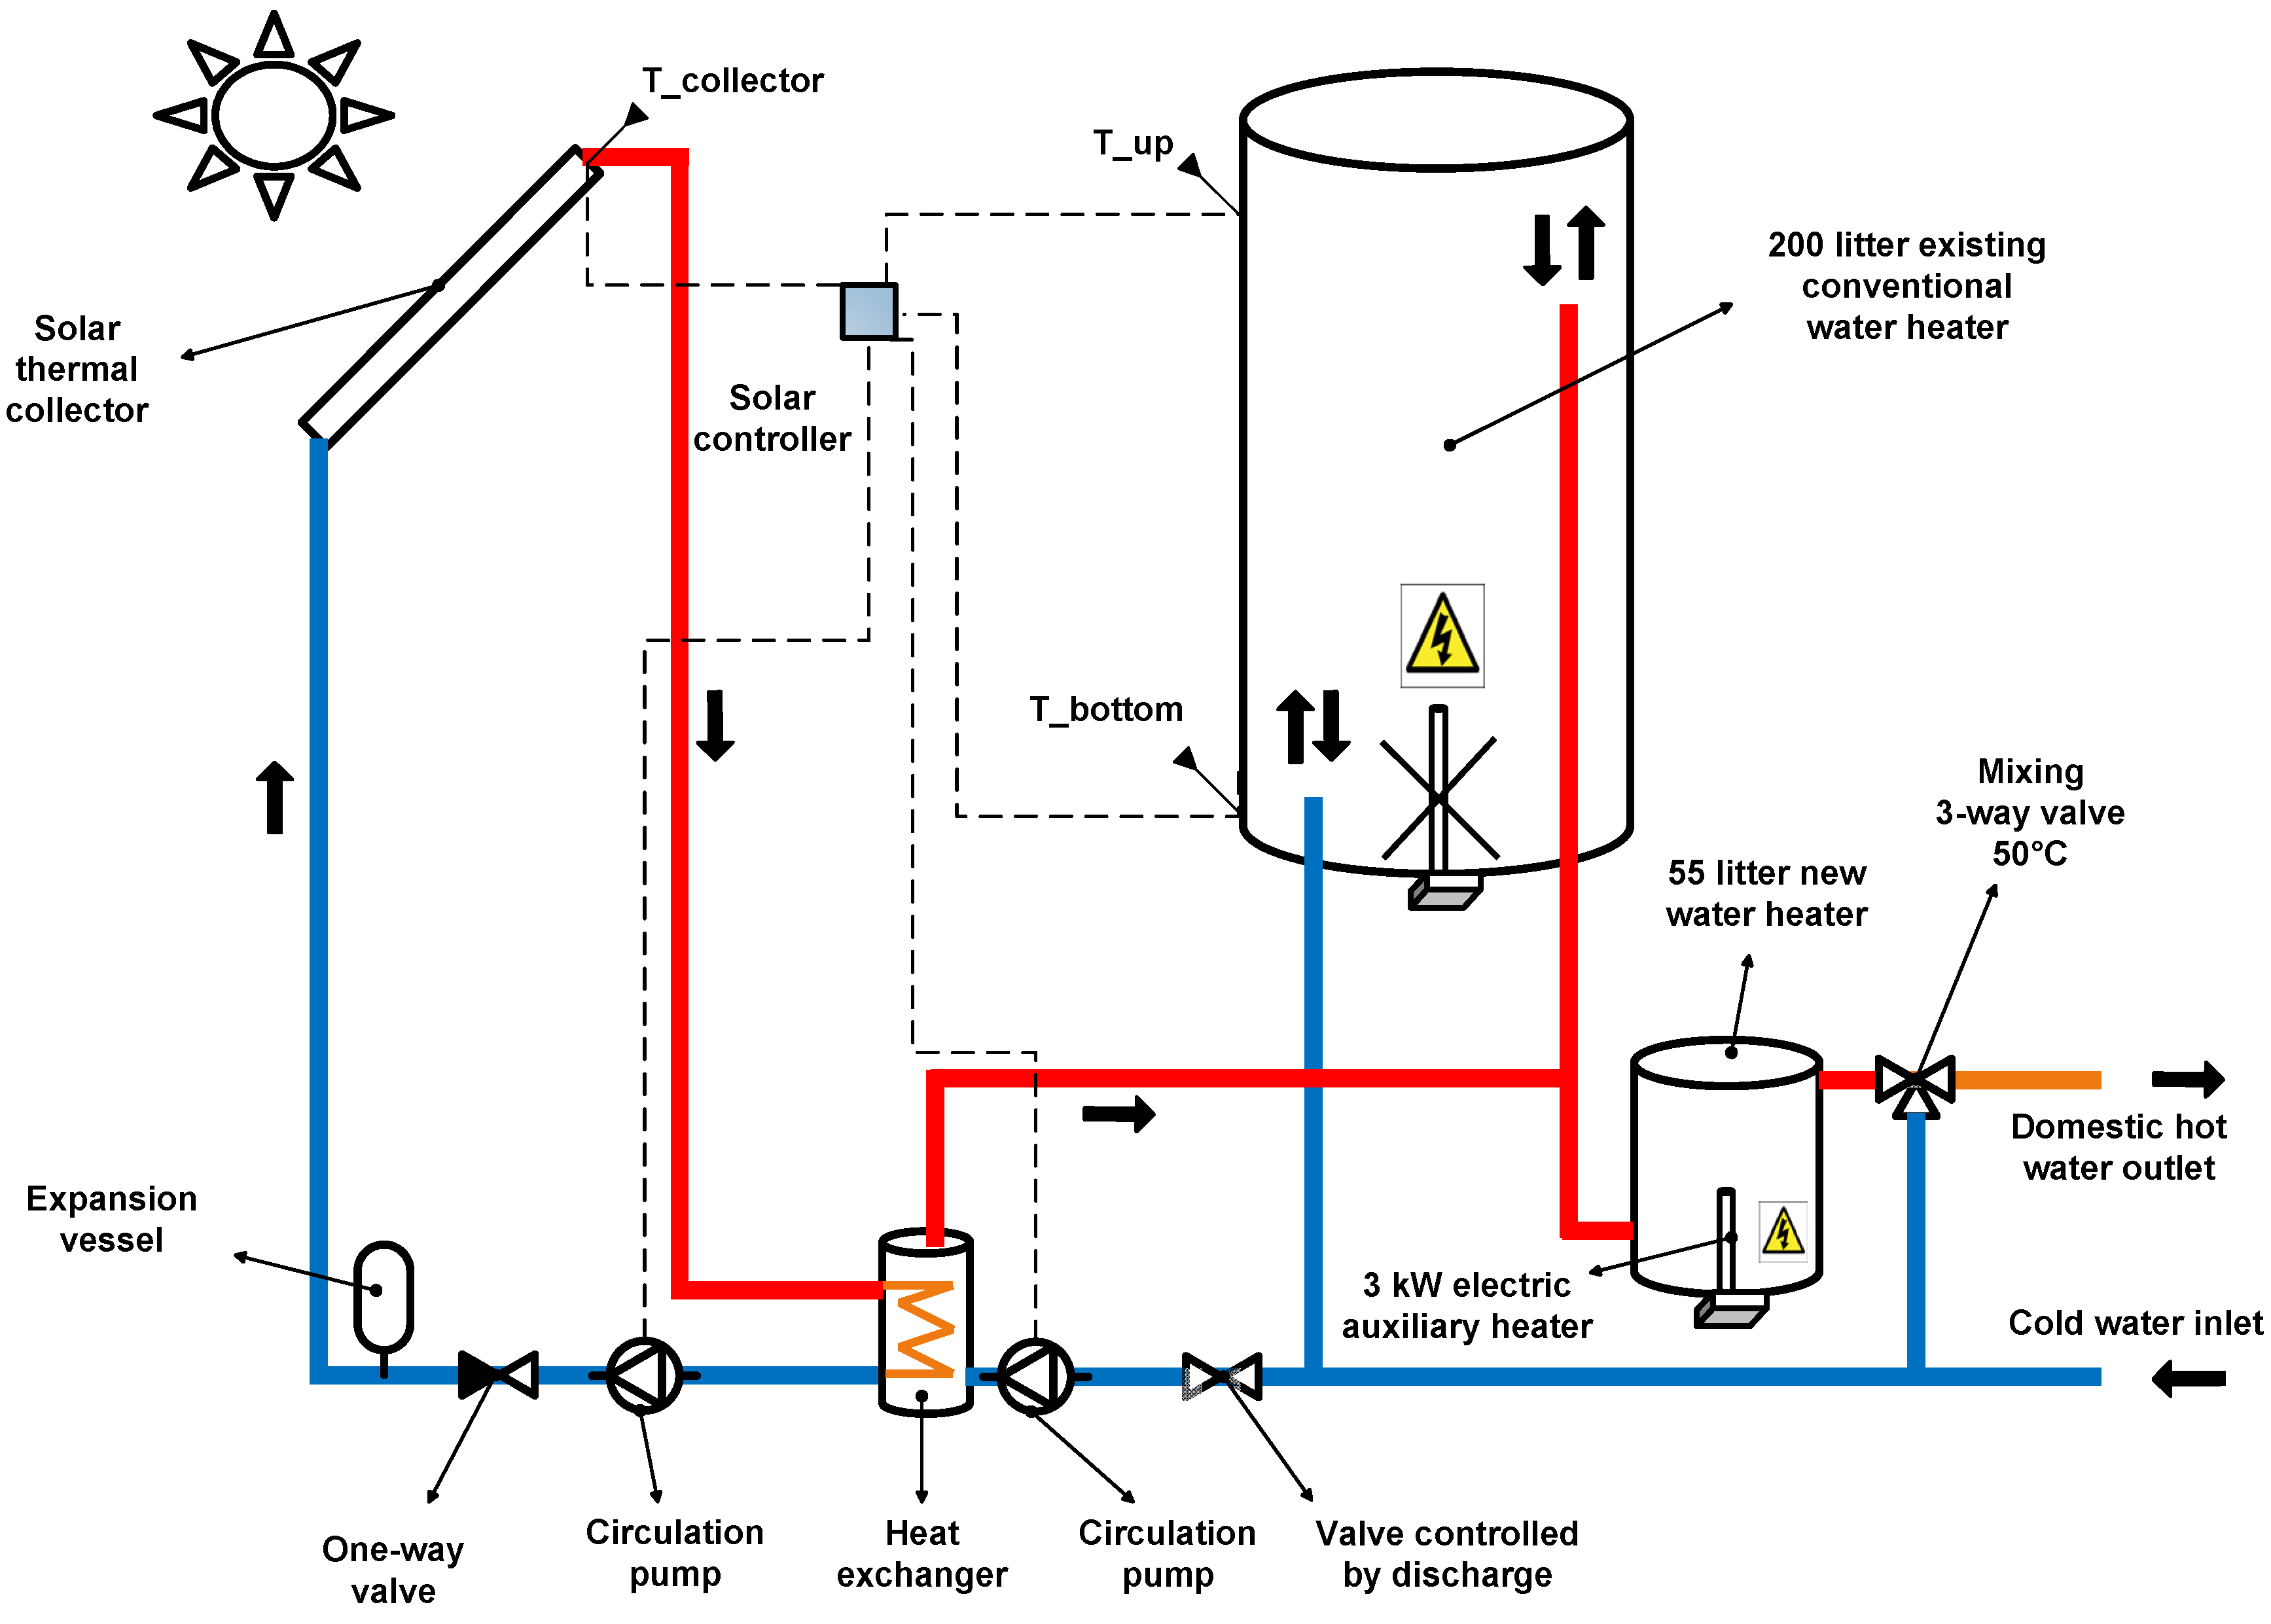 Energies | Free Full-Text | Retrofitting Domestic Hot Water Heaters for  Solar Water Heating Systems in Single-Family Houses in a Cold Climate: A  Theoretical Analysis